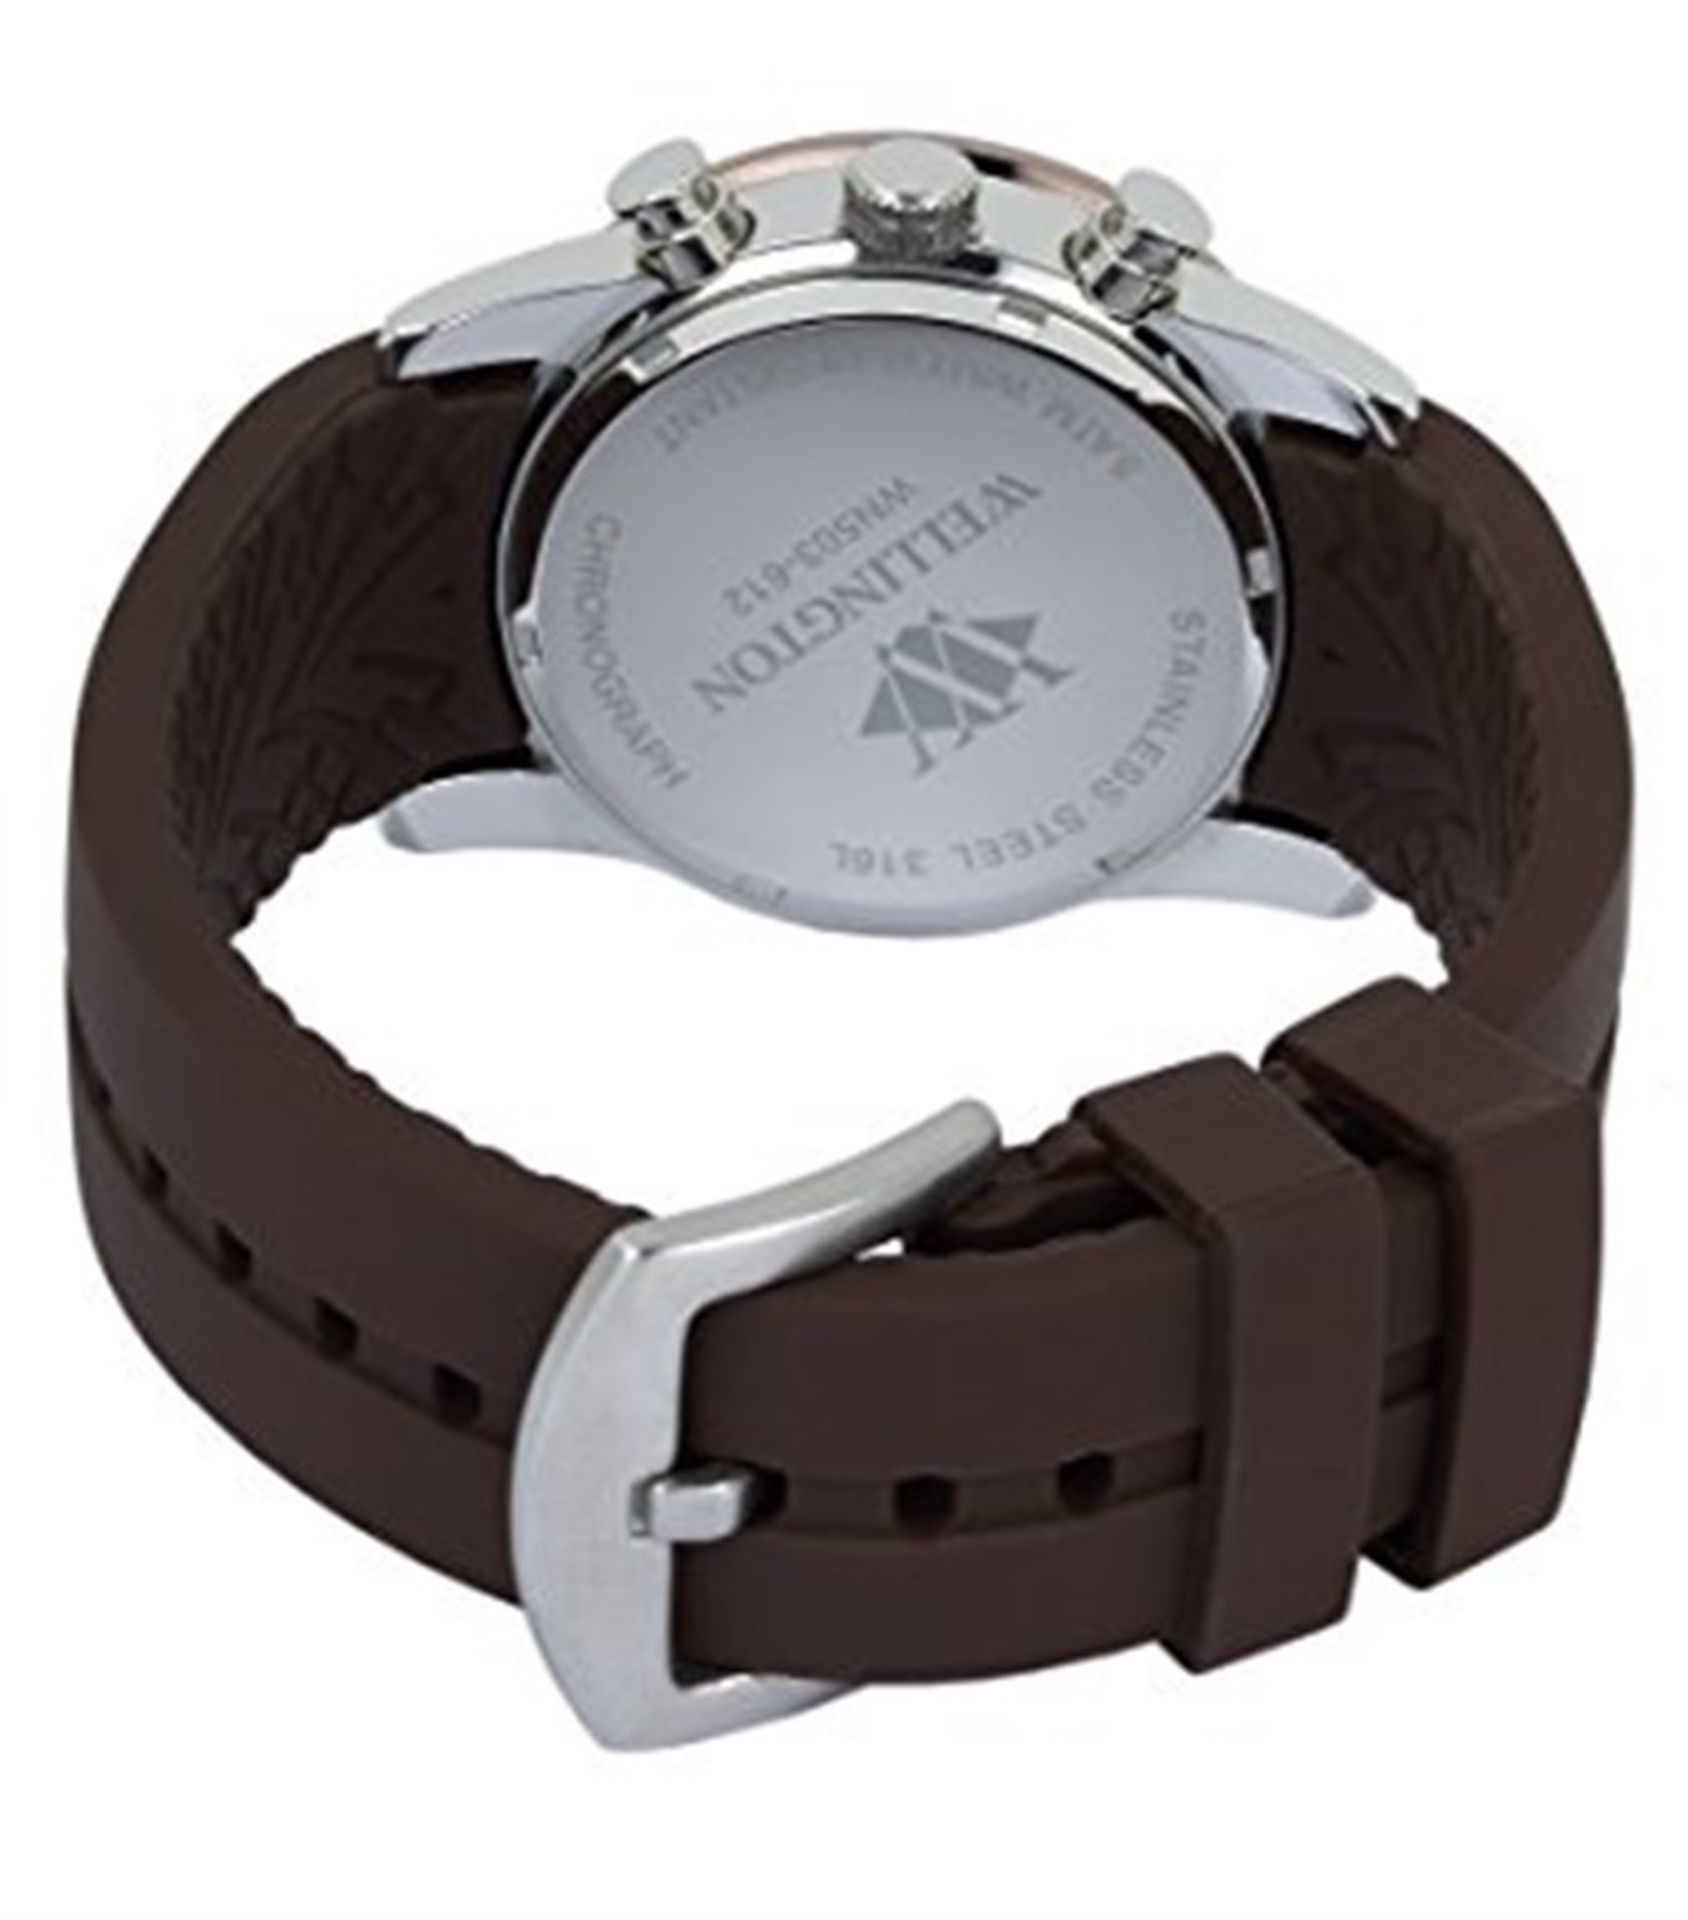 Wellington Ladies Quartz Watch with Silver Dial Analogue Display and Brown Silicone Strap WN503-612 - Image 4 of 5